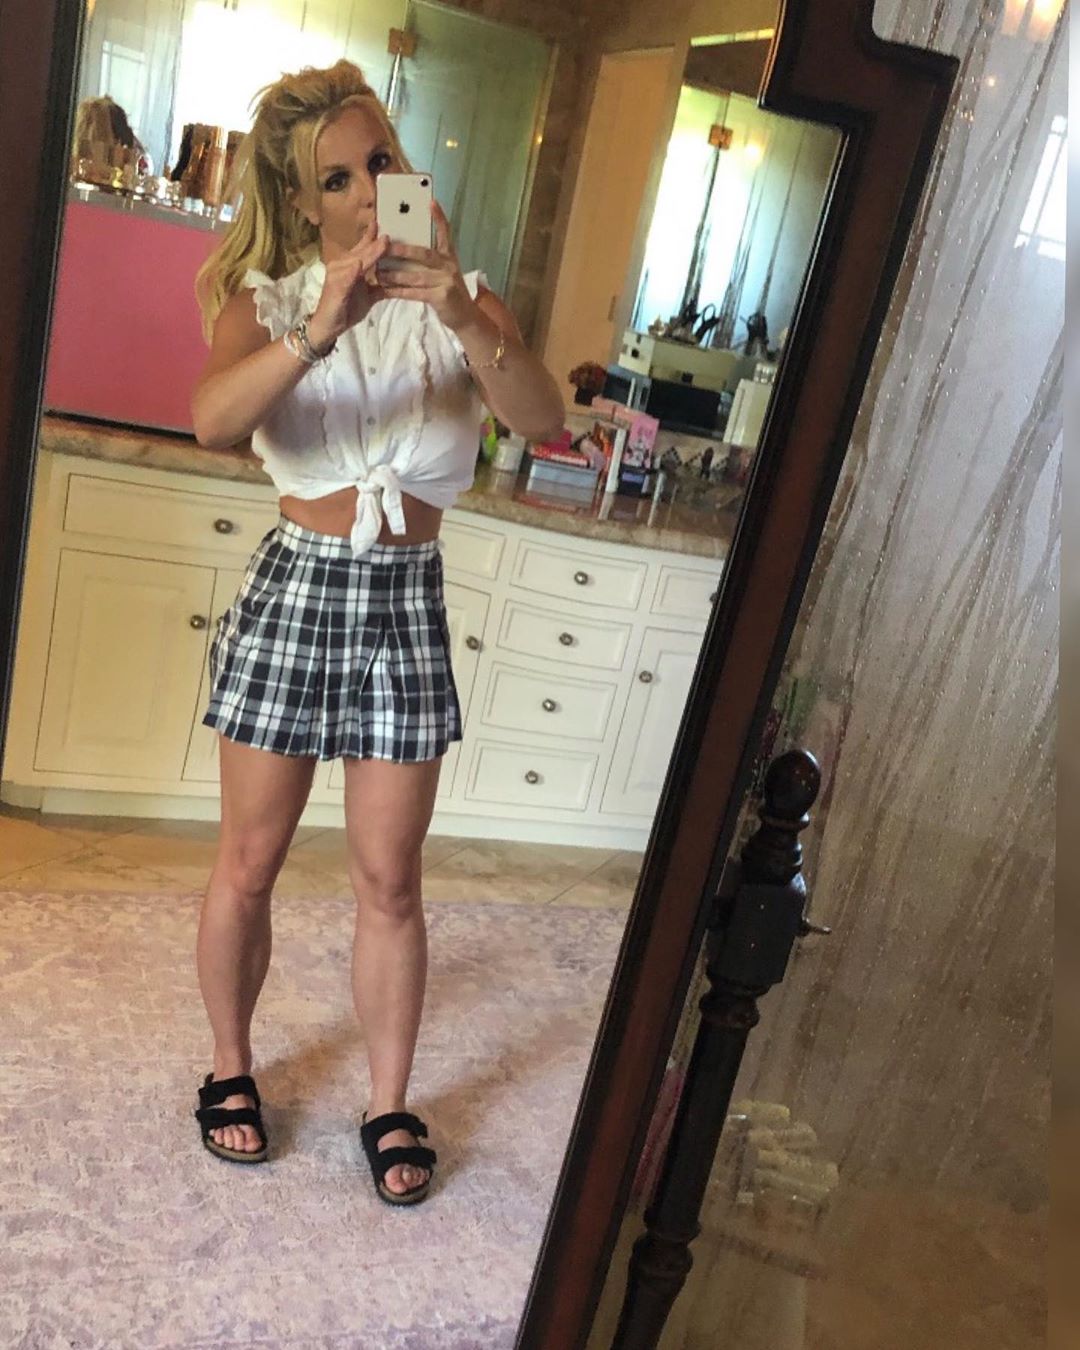 Britney Spears gives off strong …Baby One More Time vibes in throwback schoolgirl outfit